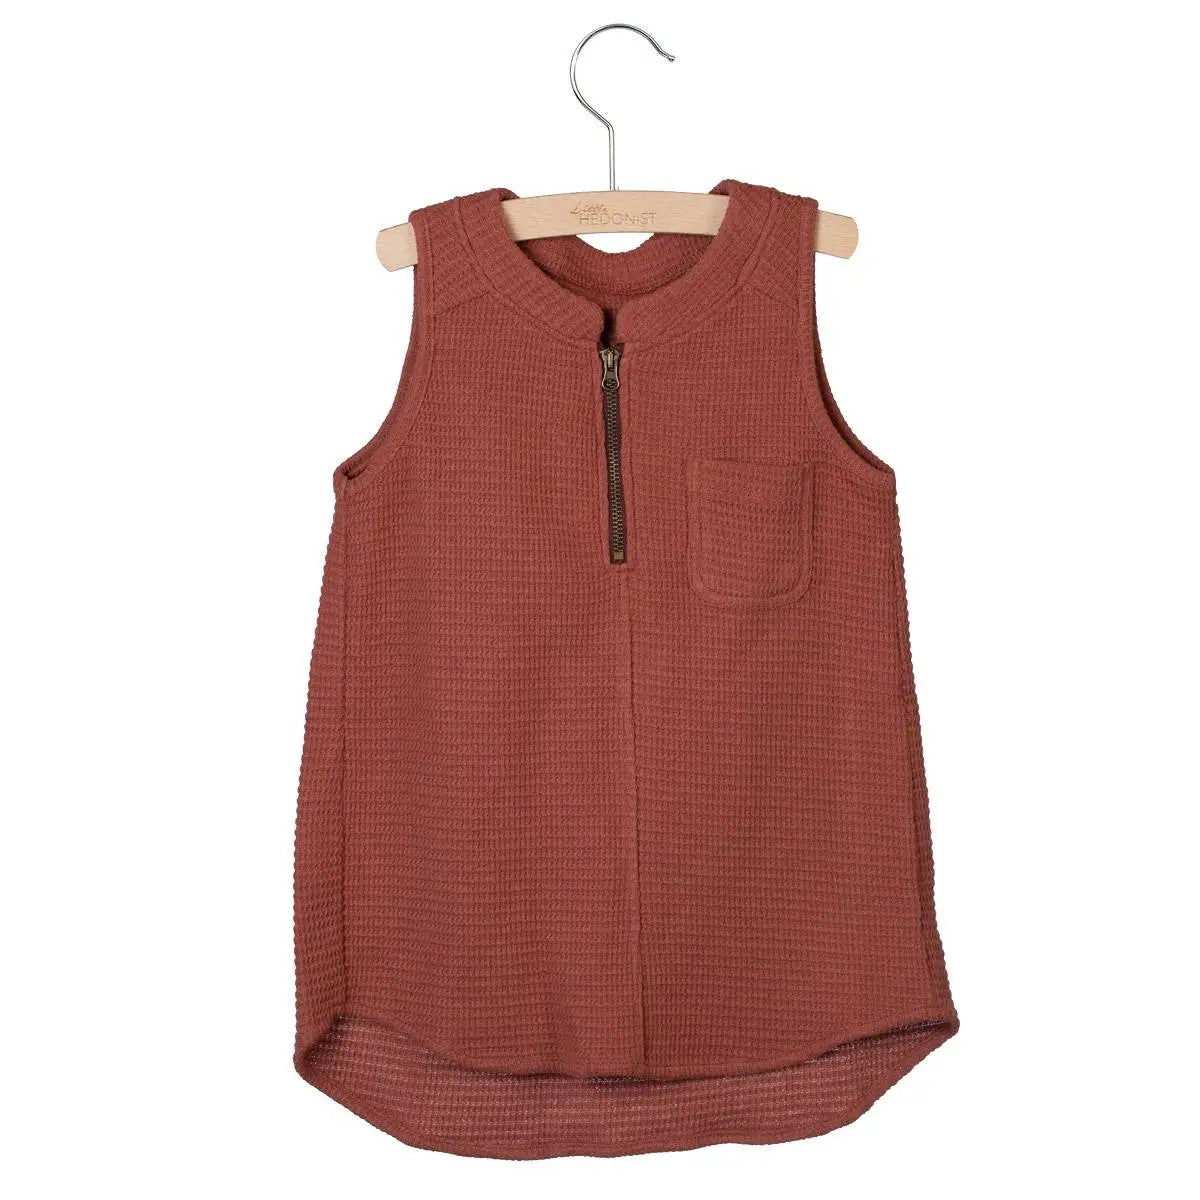 Little Hedonist auburn sleeveless top in an organic, soft, and breathable cotton